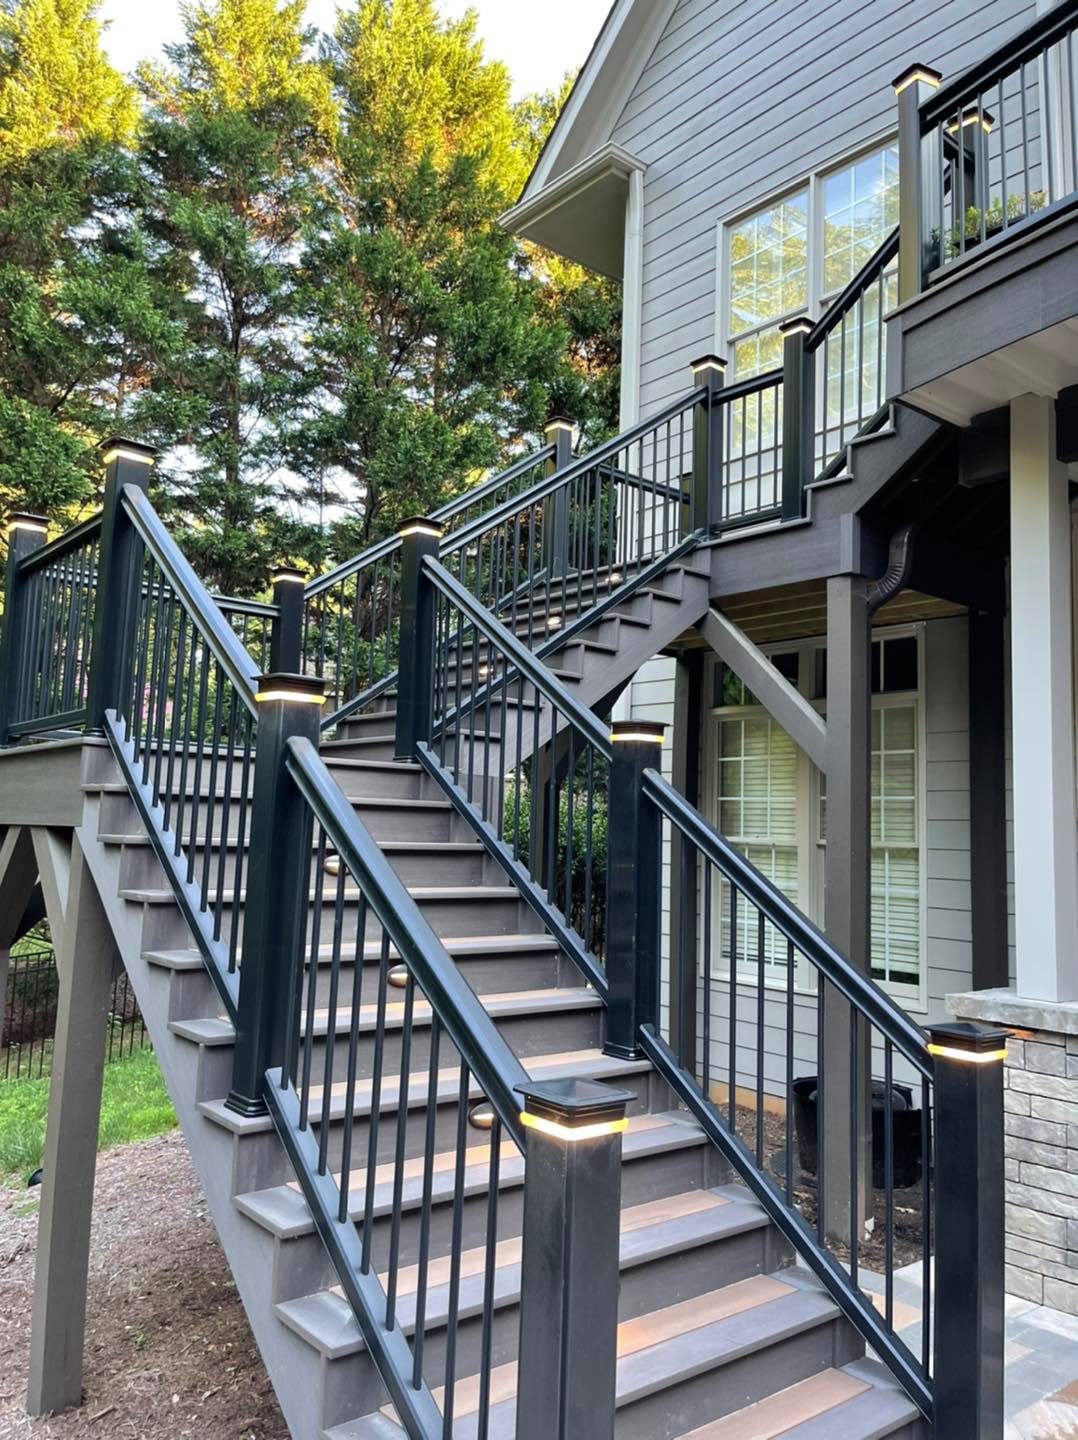 Deck stairs with liighting on posts